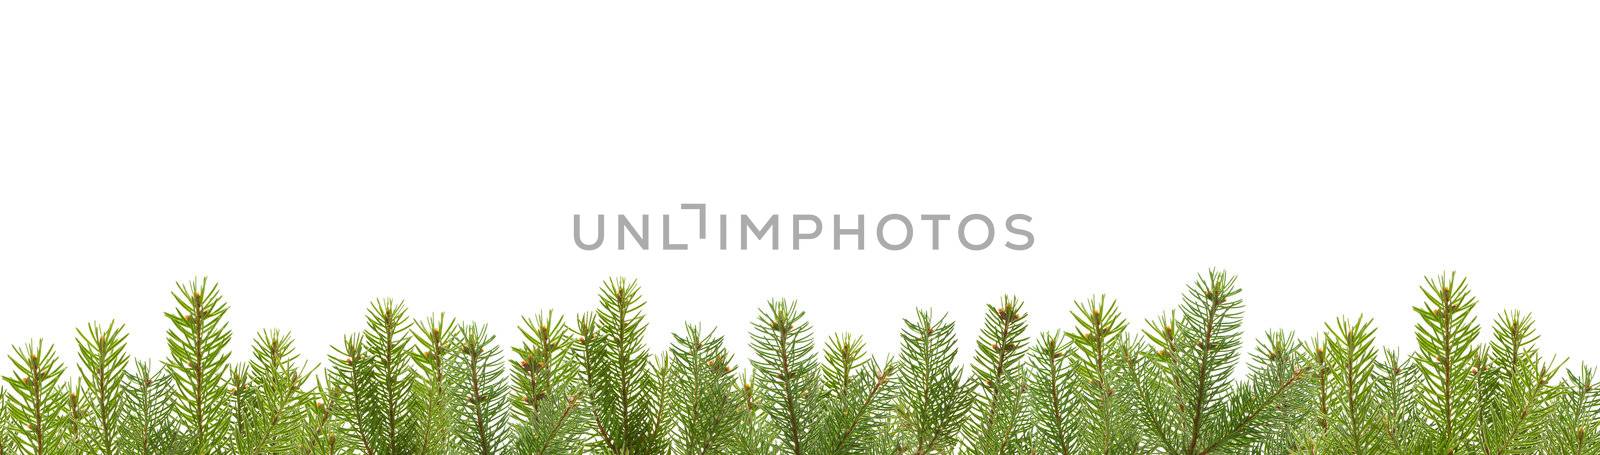 frame from firtree branches, isolated on white